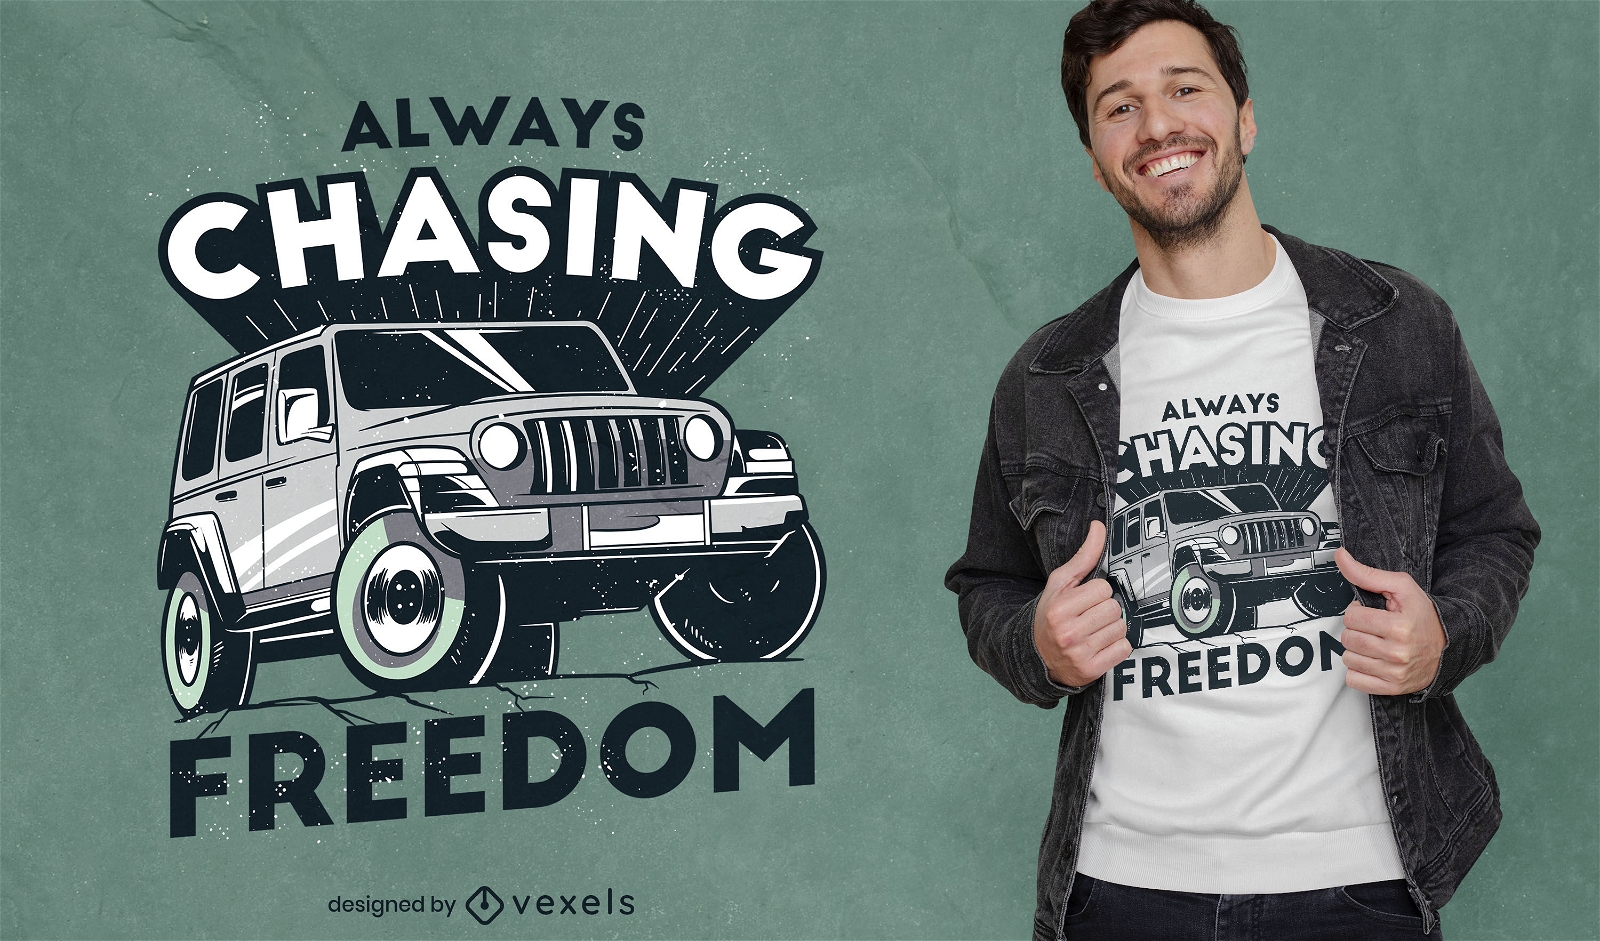 Freedom truck quote t-shirt design